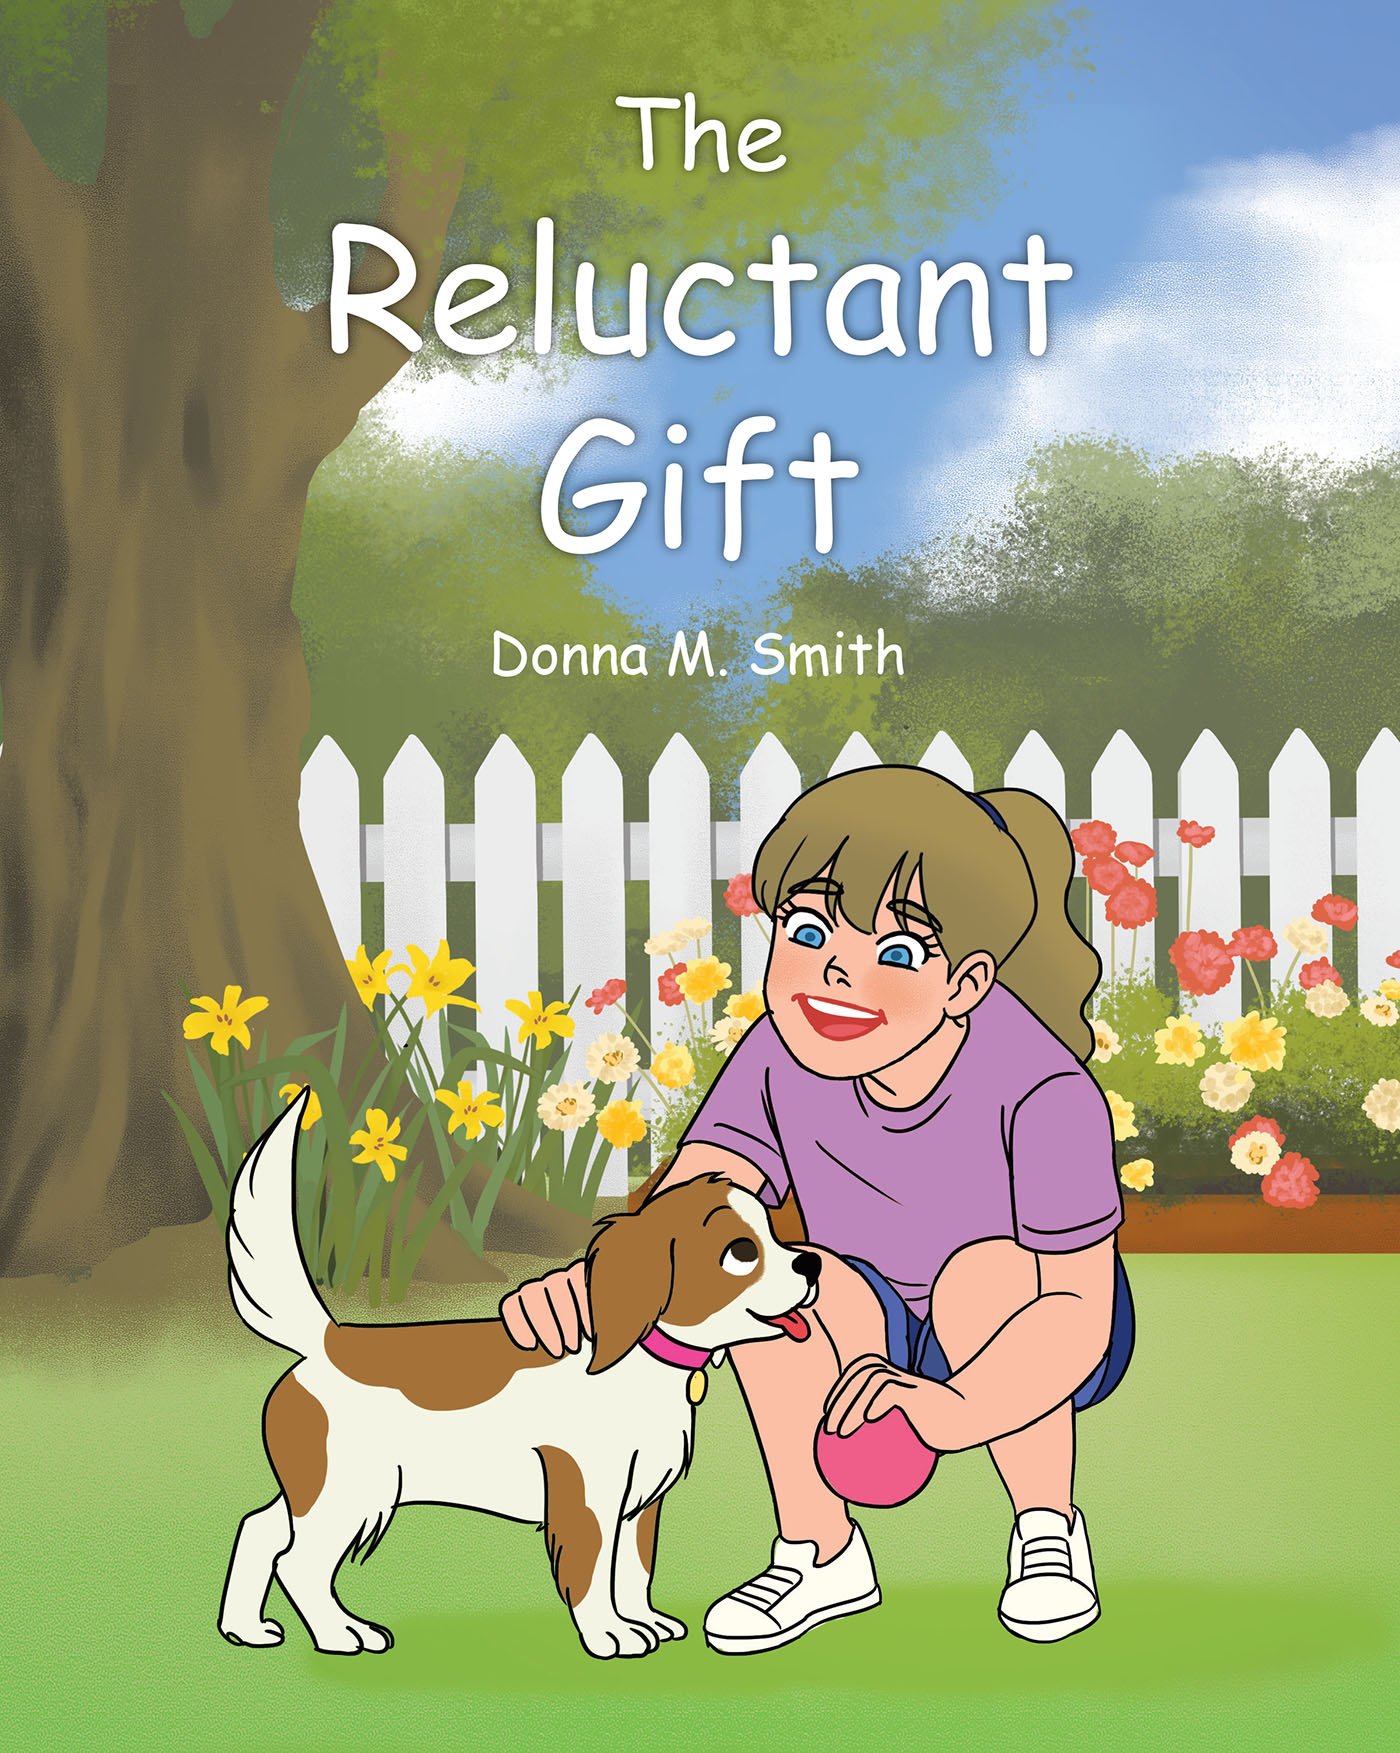 Donna M. Smith’s Newly Released "The Reluctant Gift" is an Emotionally Charged Tale of Sacrifice and Unconditional Love